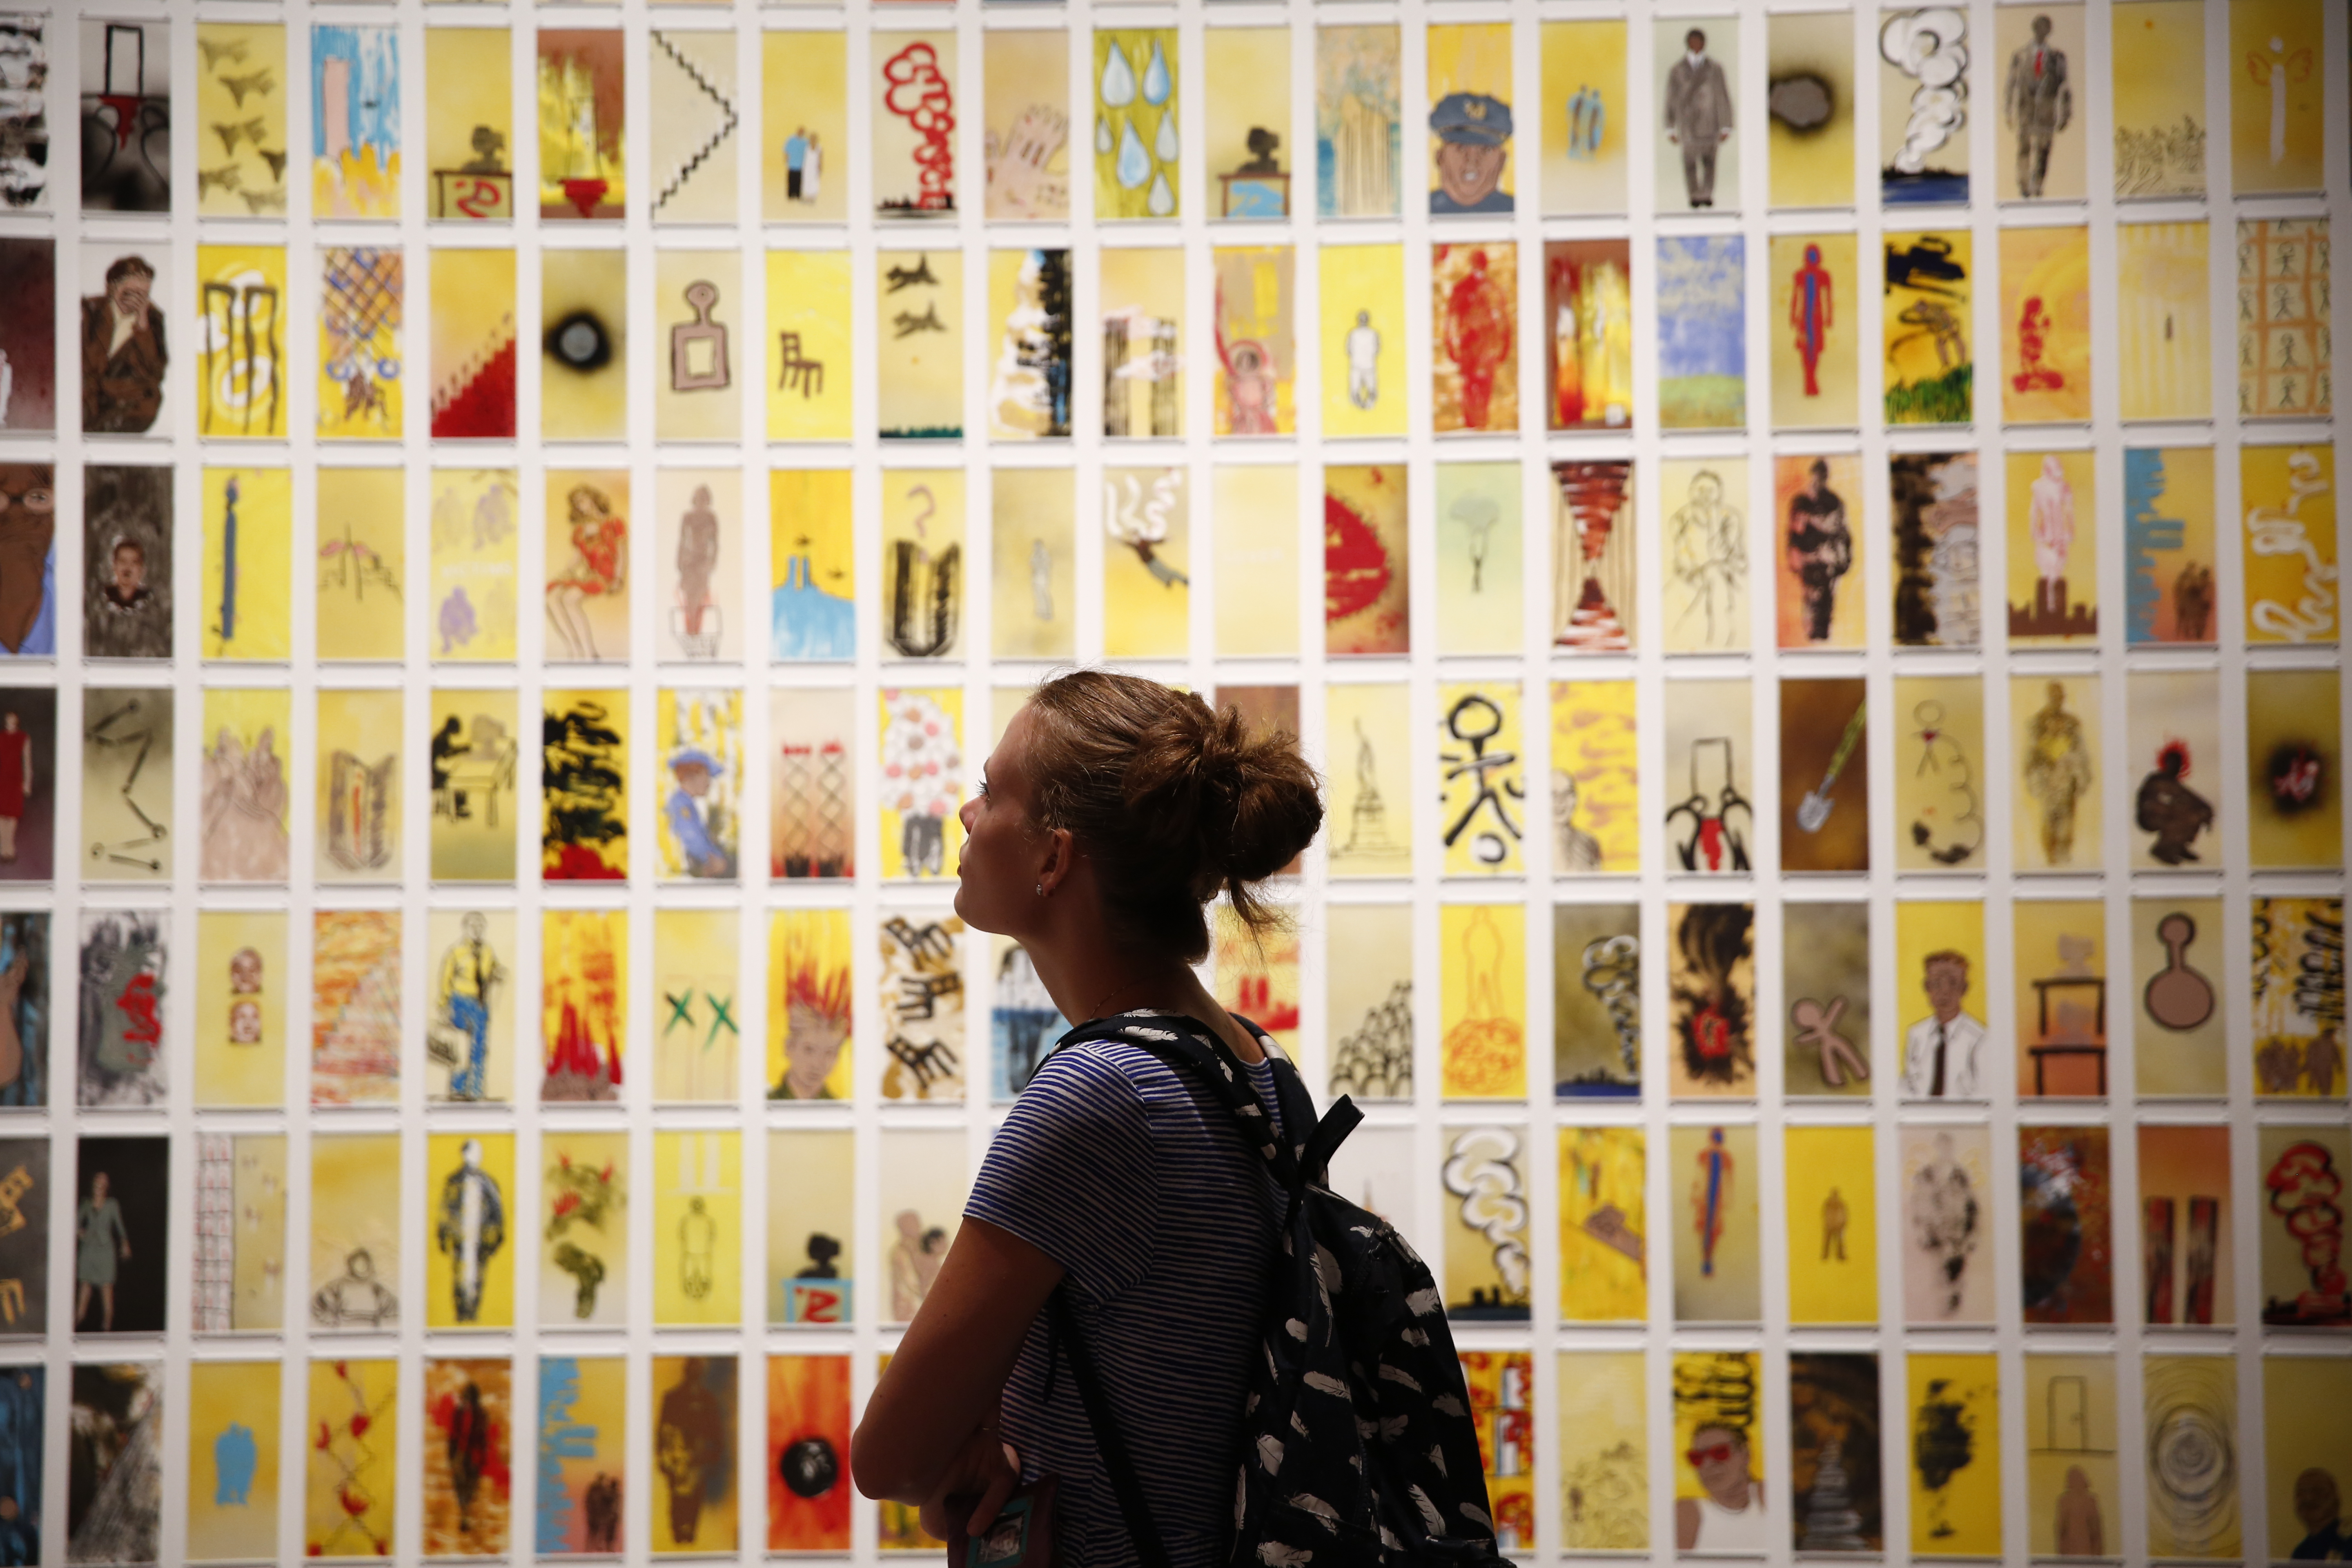 A woman views the 9/11 Memorial Museum’s exhibition, Rendering the Unthinkable. The work features dozens of works created by artists in response to 9/11.